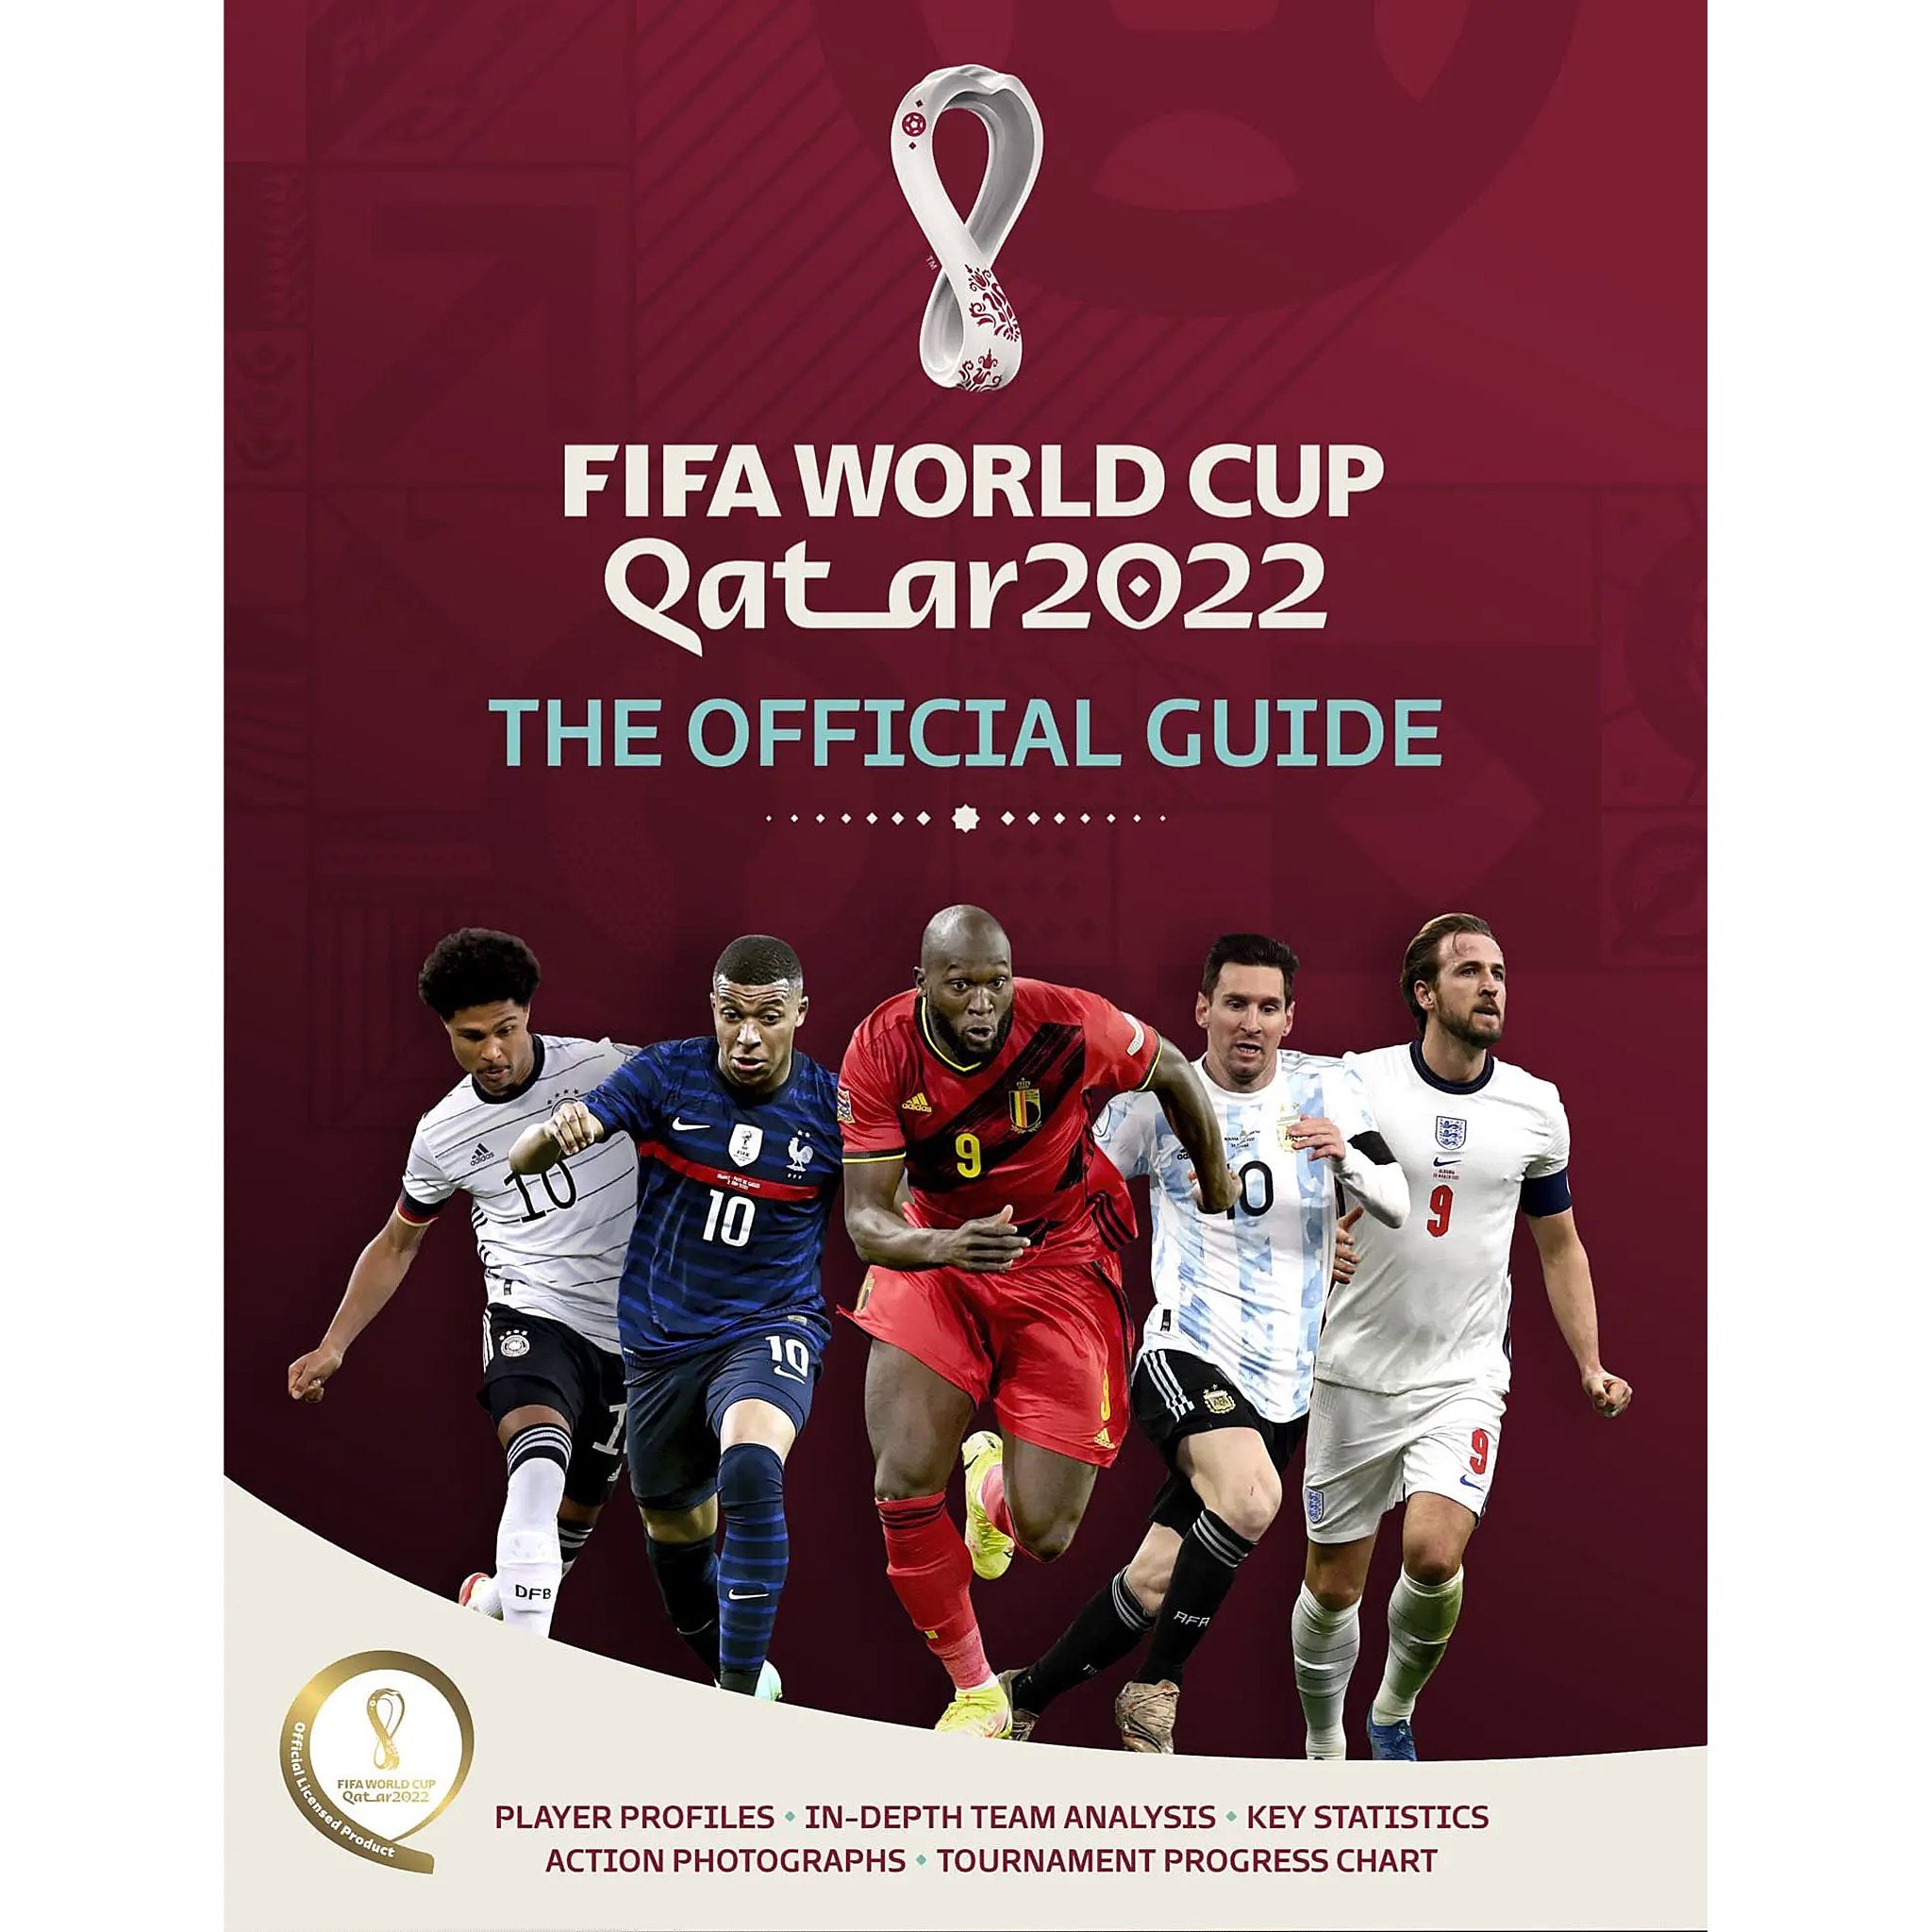 FIFA World Cup Qatar 2022 – The Official Guide